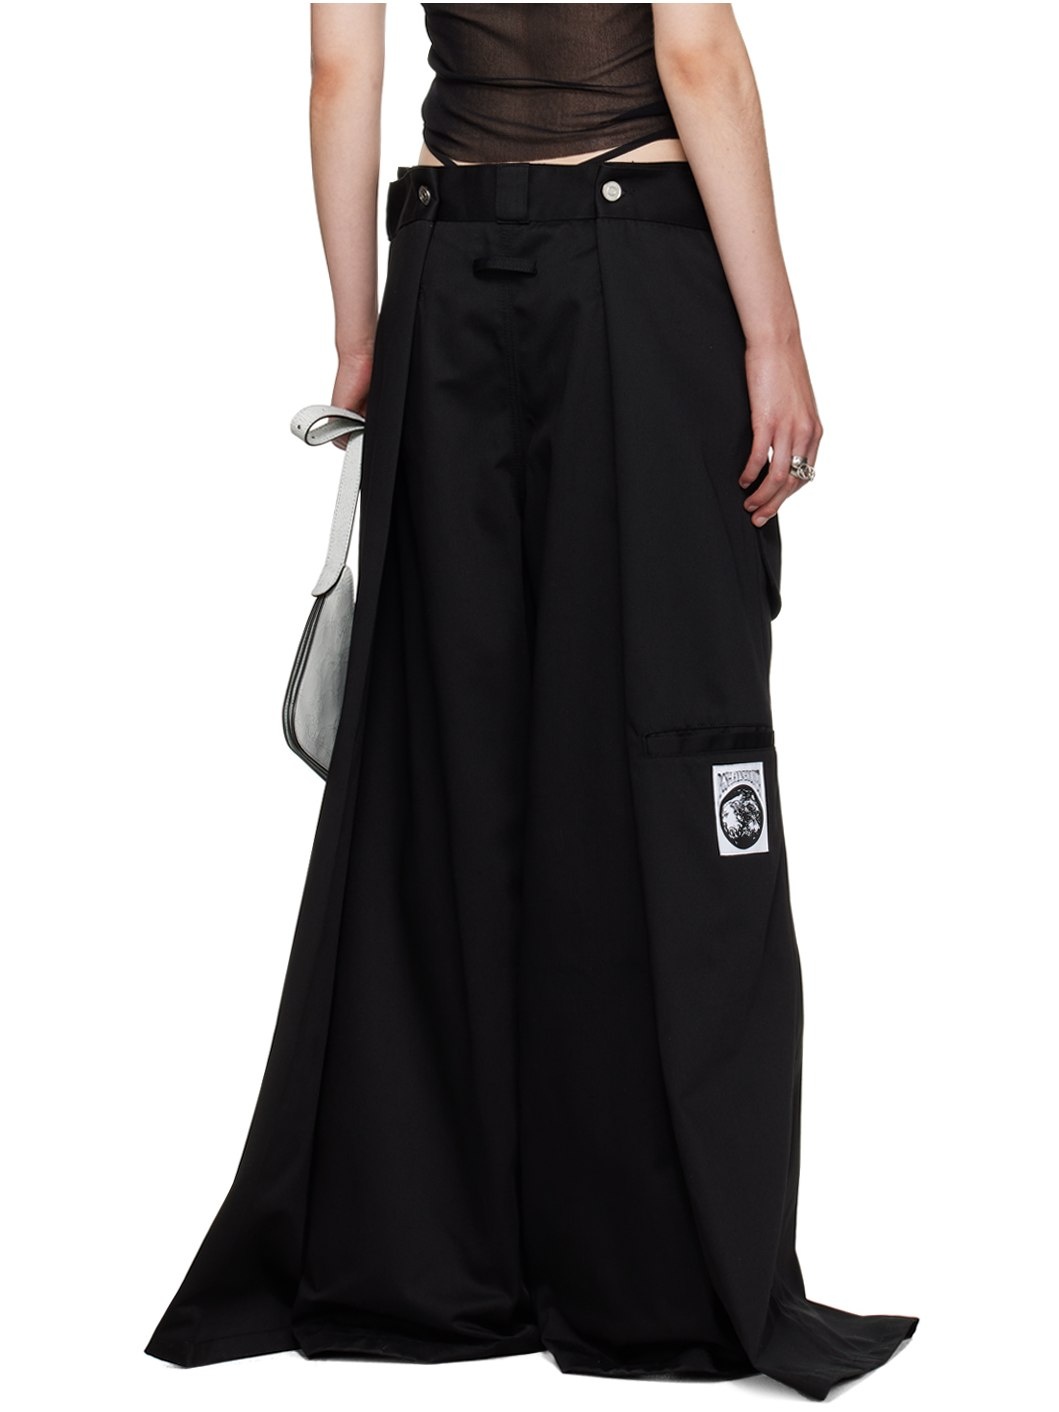 Black Shayne Oliver Edition 'The Wrap' Trousers - 3